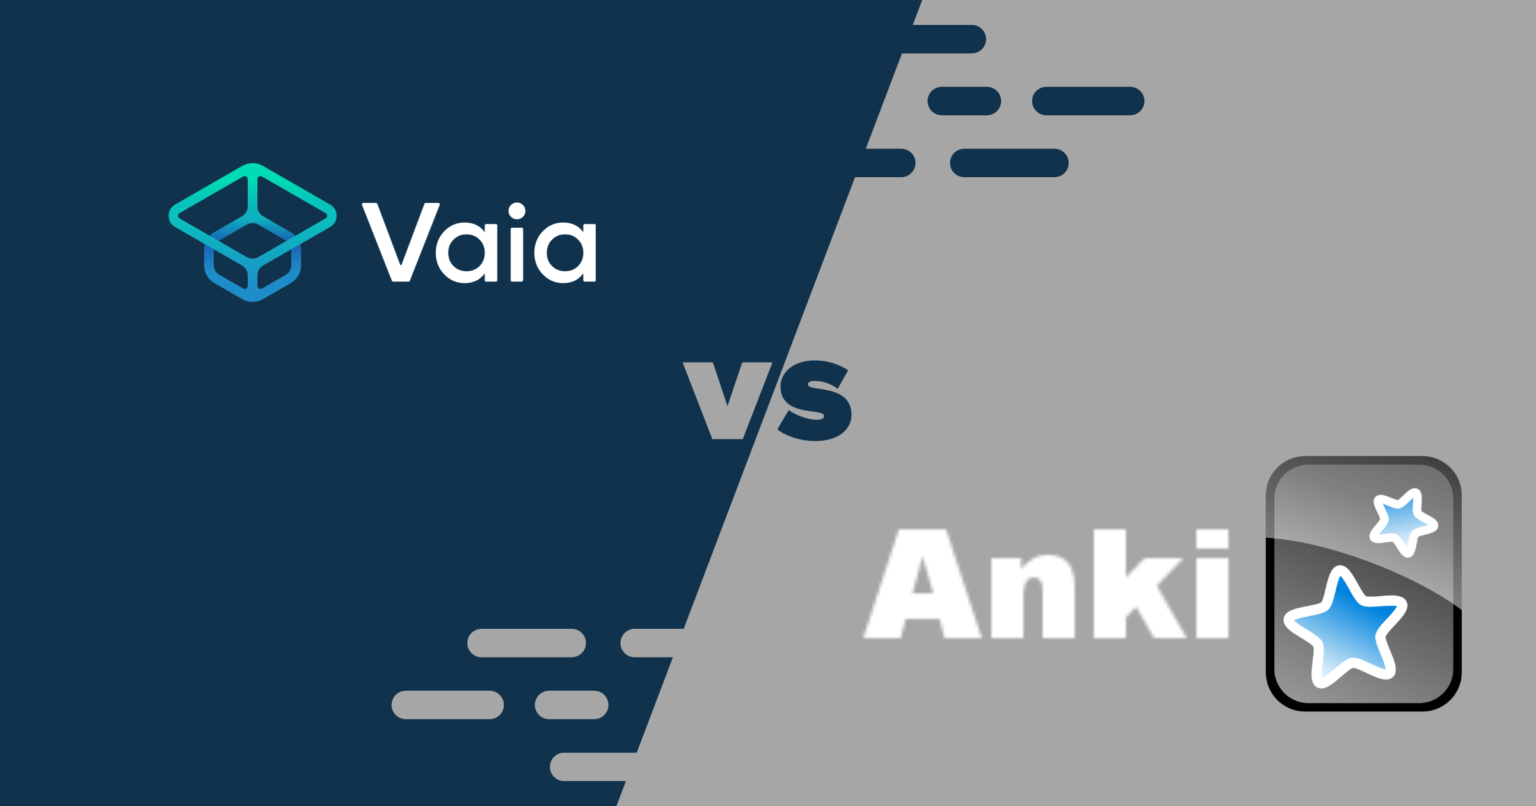 Compare the flashcard features of Vaia vs Anki App to see who comes out as the best free learning app, Vaia Magazine